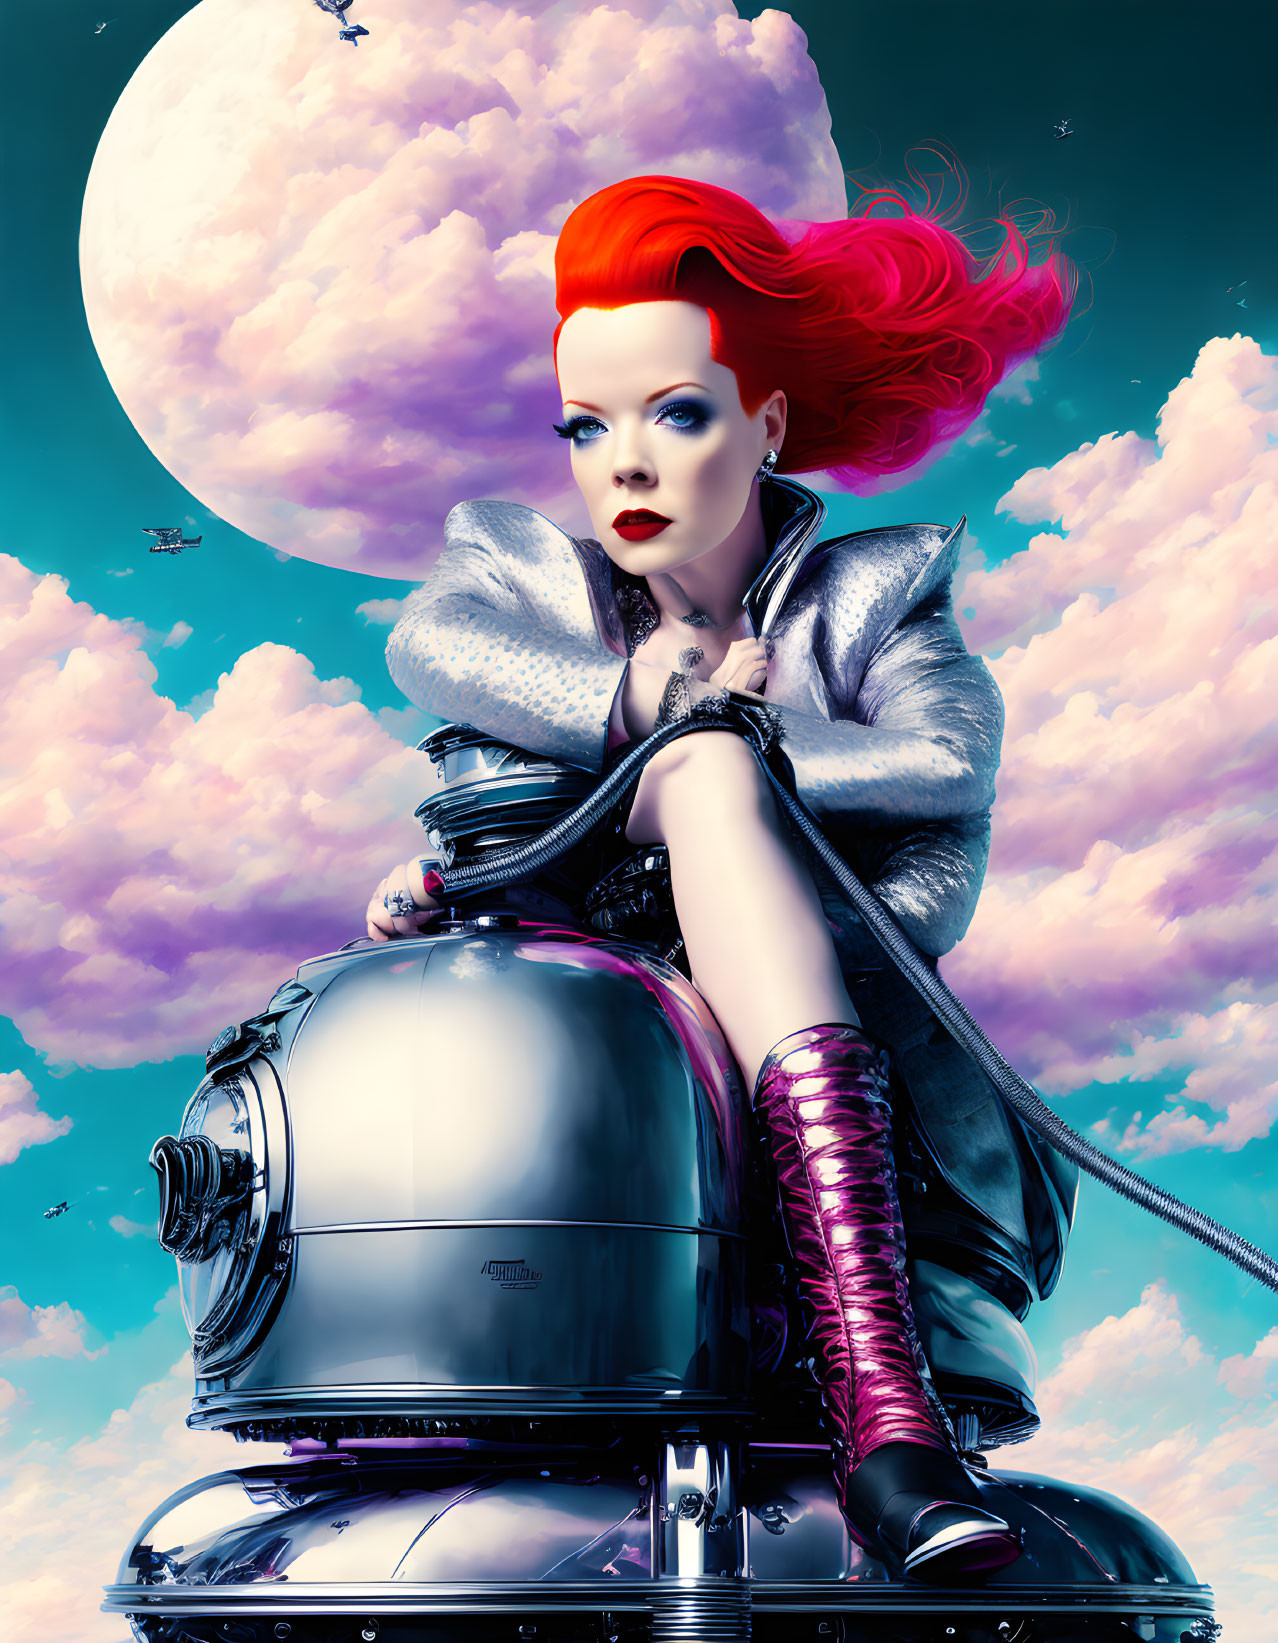 Futuristic artwork: person with red hair, silver jacket, pink boots, on mechanical device under